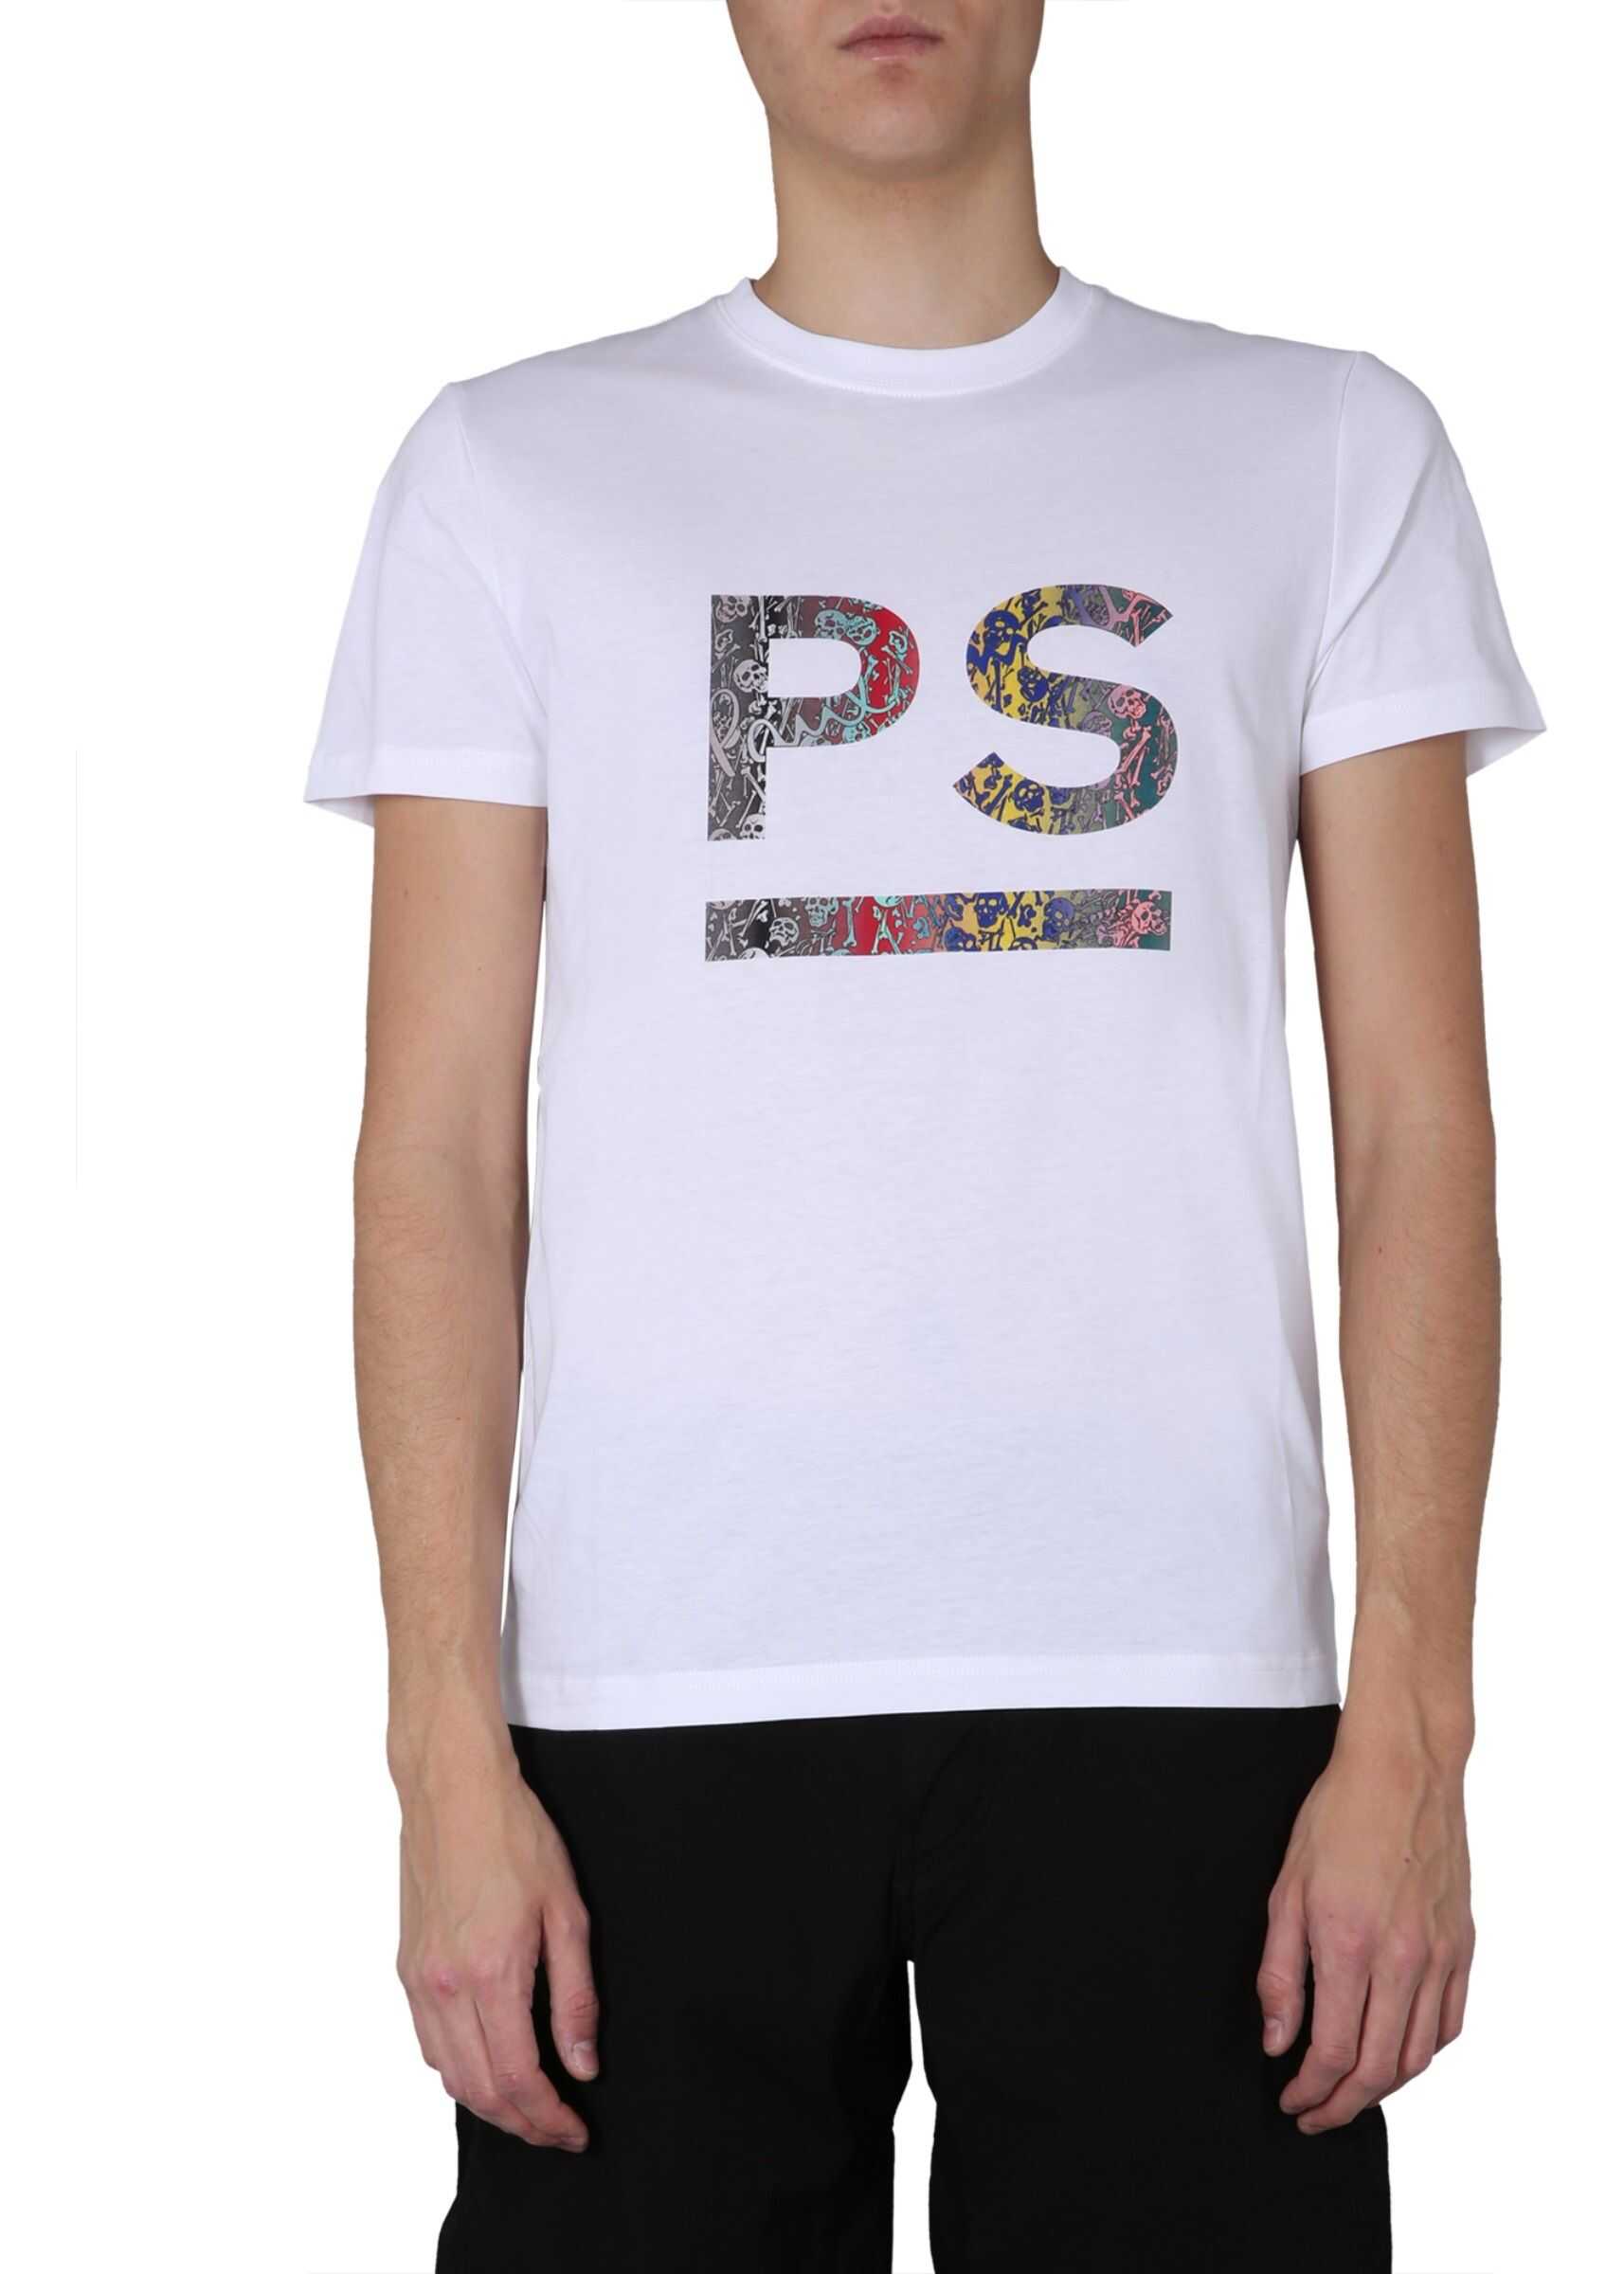 PS by Paul Smith Round Neck T-Shirt WHITE